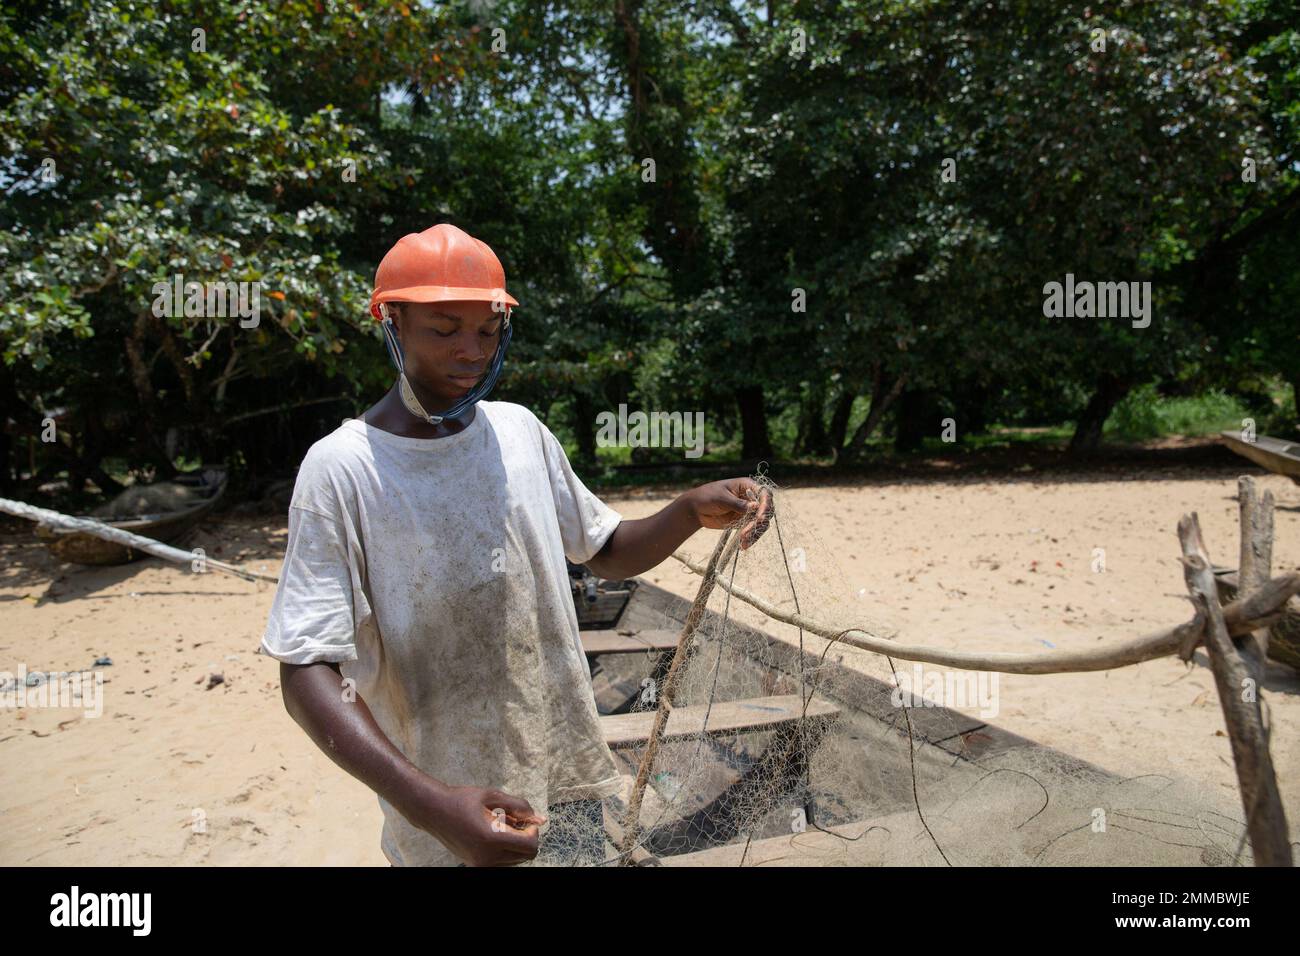 A young fisherman adjusts his net on his boat before a fishing session Stock Photo